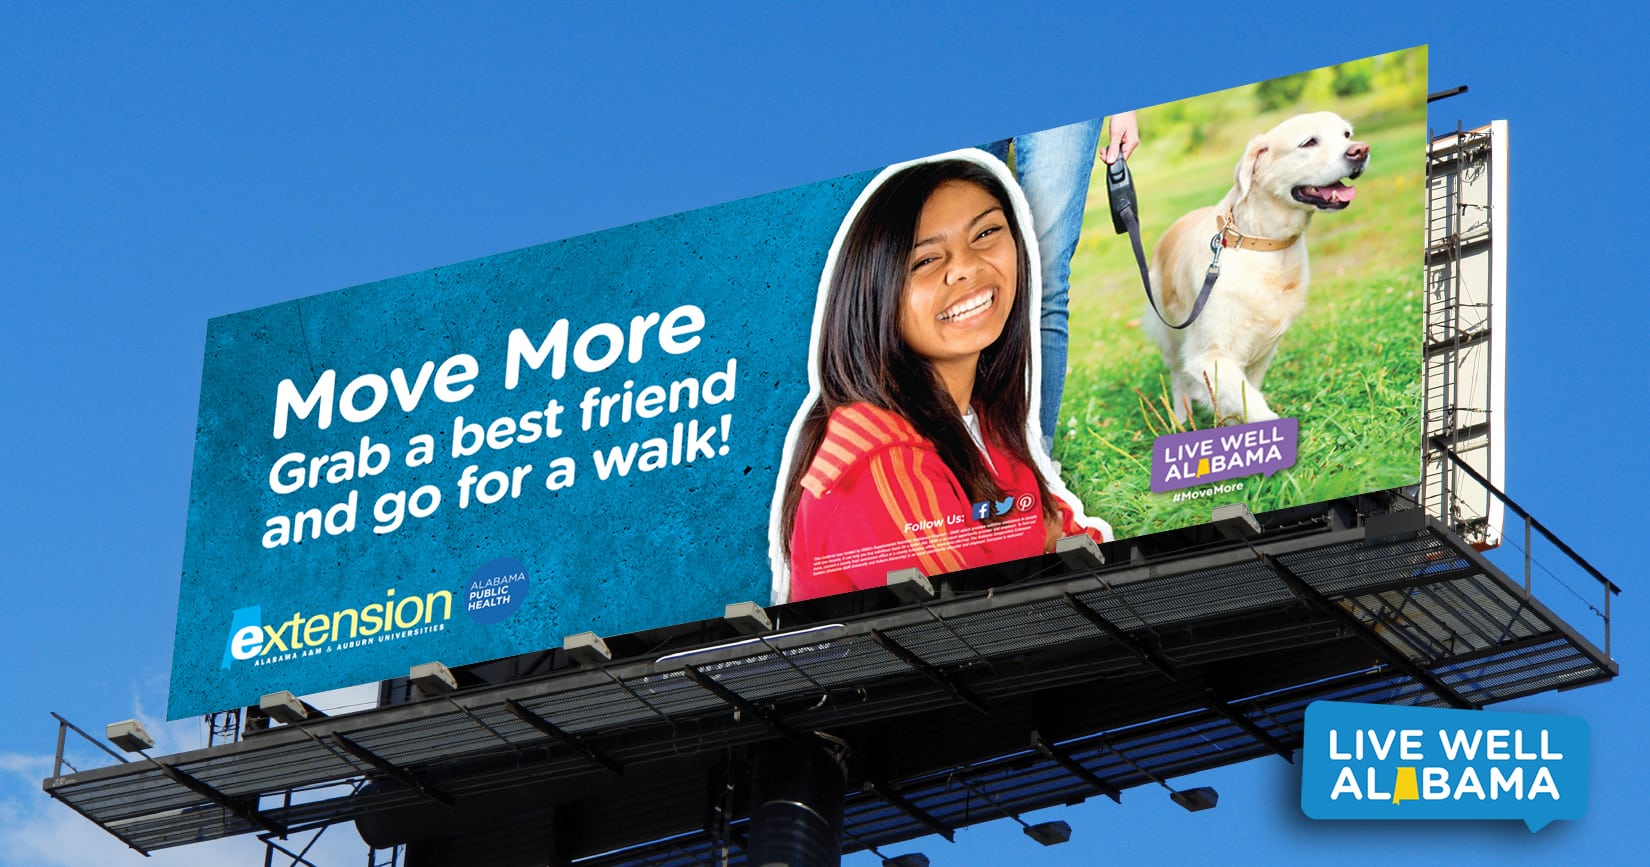 Billboards, Live Well Alabama billboard, Move More. Grab a best friend and go for a walk.